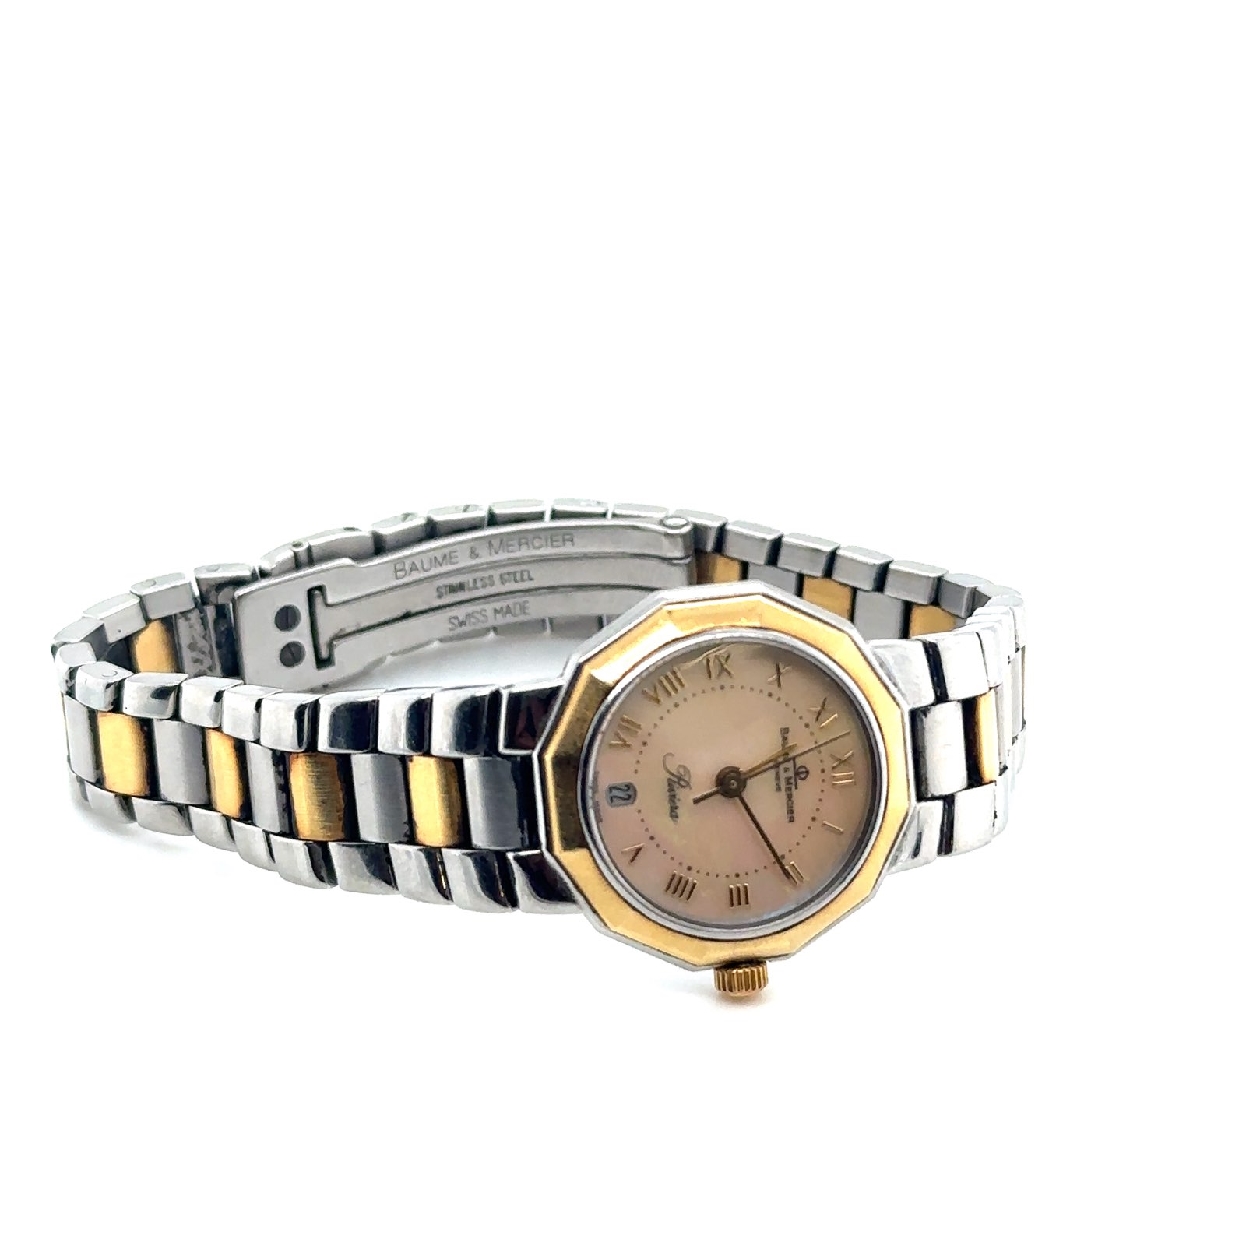 Baume & Mercier Two Tone Stainless Steel Swiss Made Riviera Watch with Mother of Pearl Watch Face 

